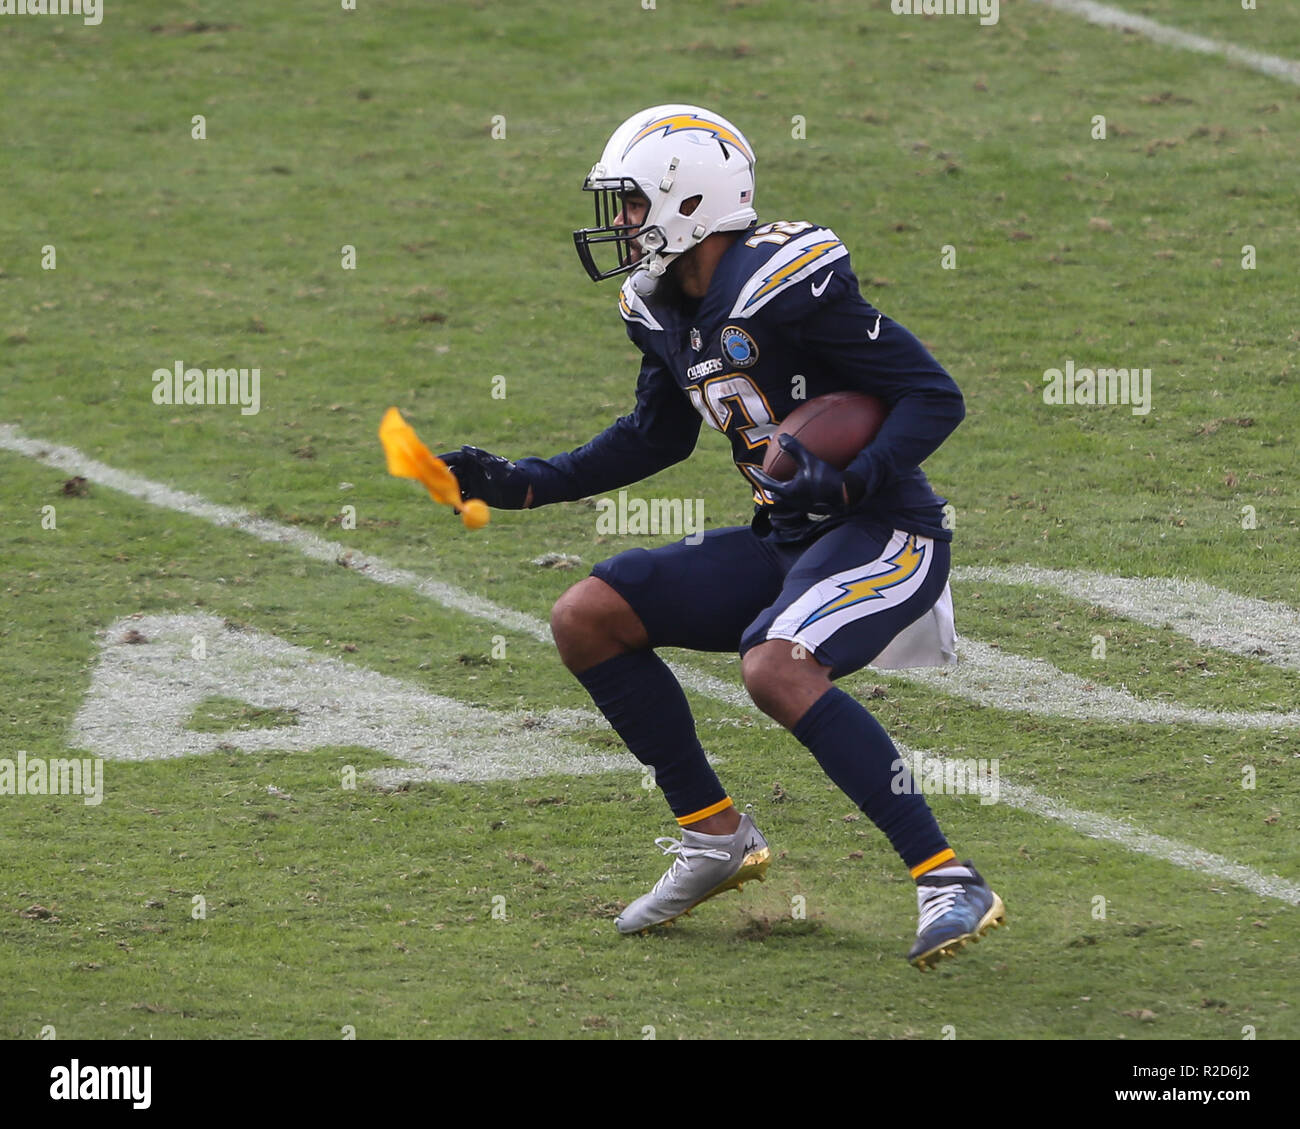 Carson, CA. 18th Nov, 2018. Los Angeles Chargers wide receiver Keenan Allen #13 making a catch with offensive pass interference penalty flag coming at him during the NFL Denver Broncos vs Los Angeles Chargers at the Stubhub Center in Carson, Ca on November 18, 2018 (Photo by Jevone Moore) Credit: csm/Alamy Live News Stock Photo